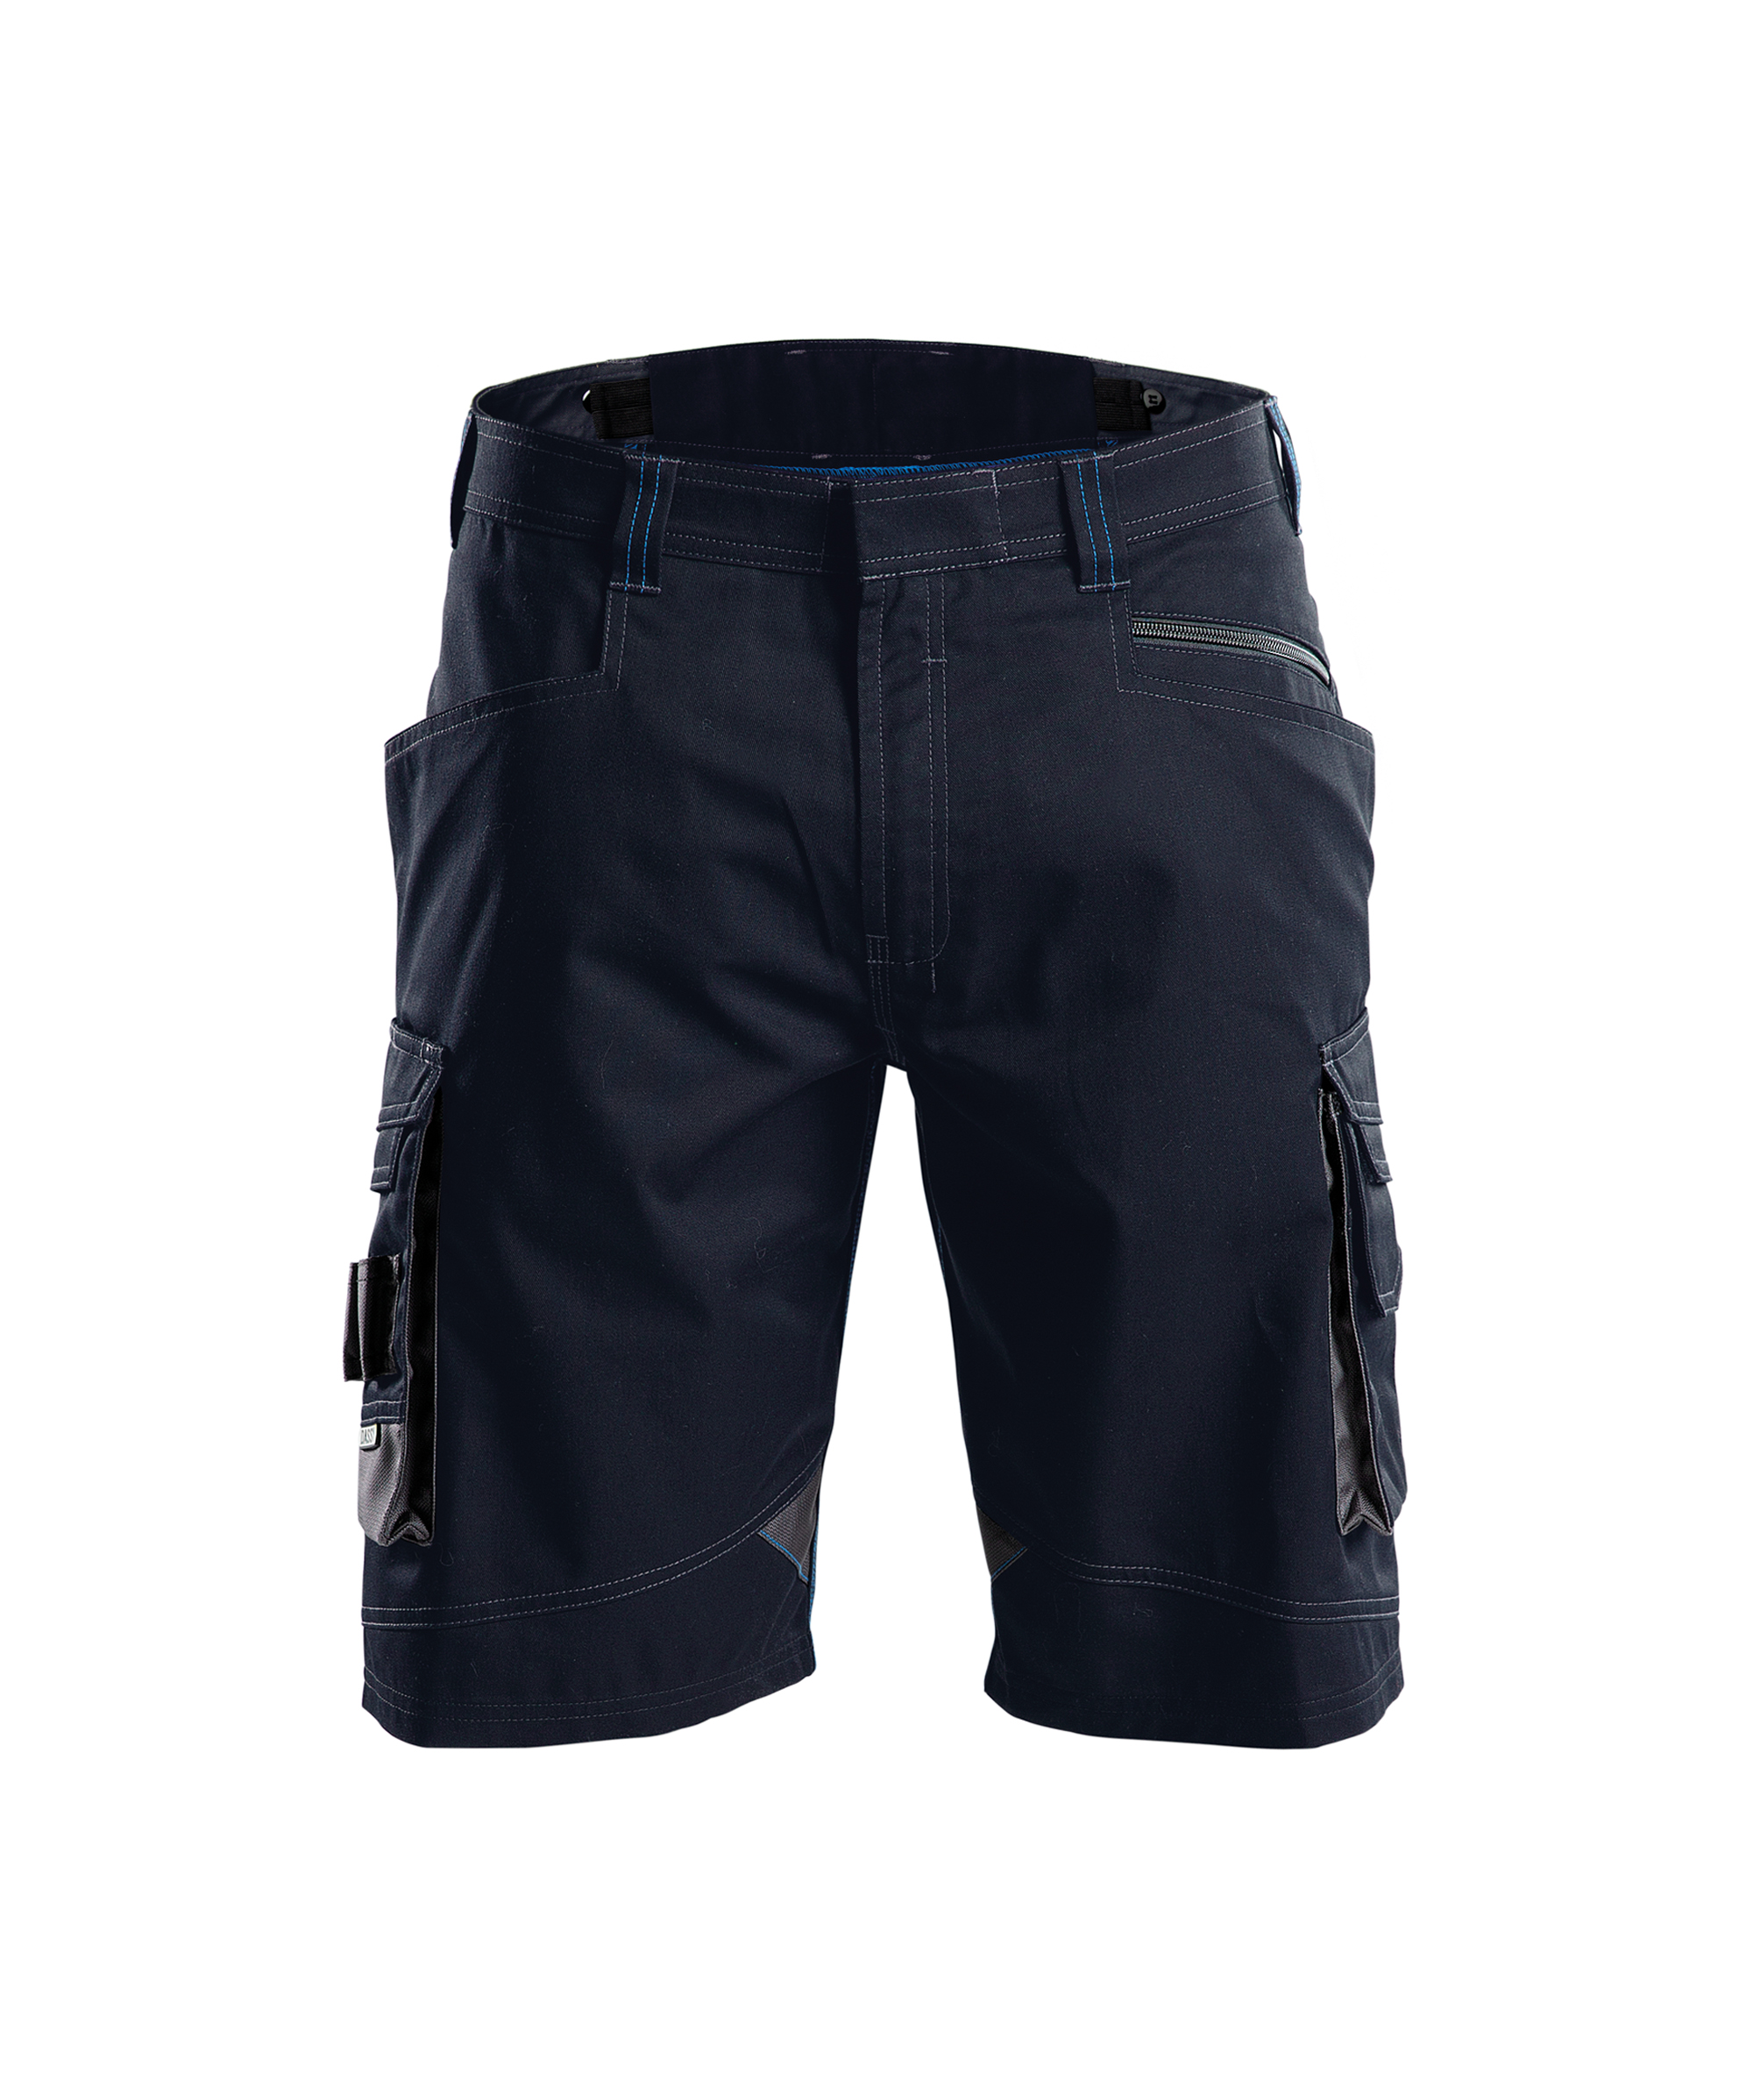 cosmic_two-tone-work-shorts_midnight-blue-anthracite-grey_front.jpg